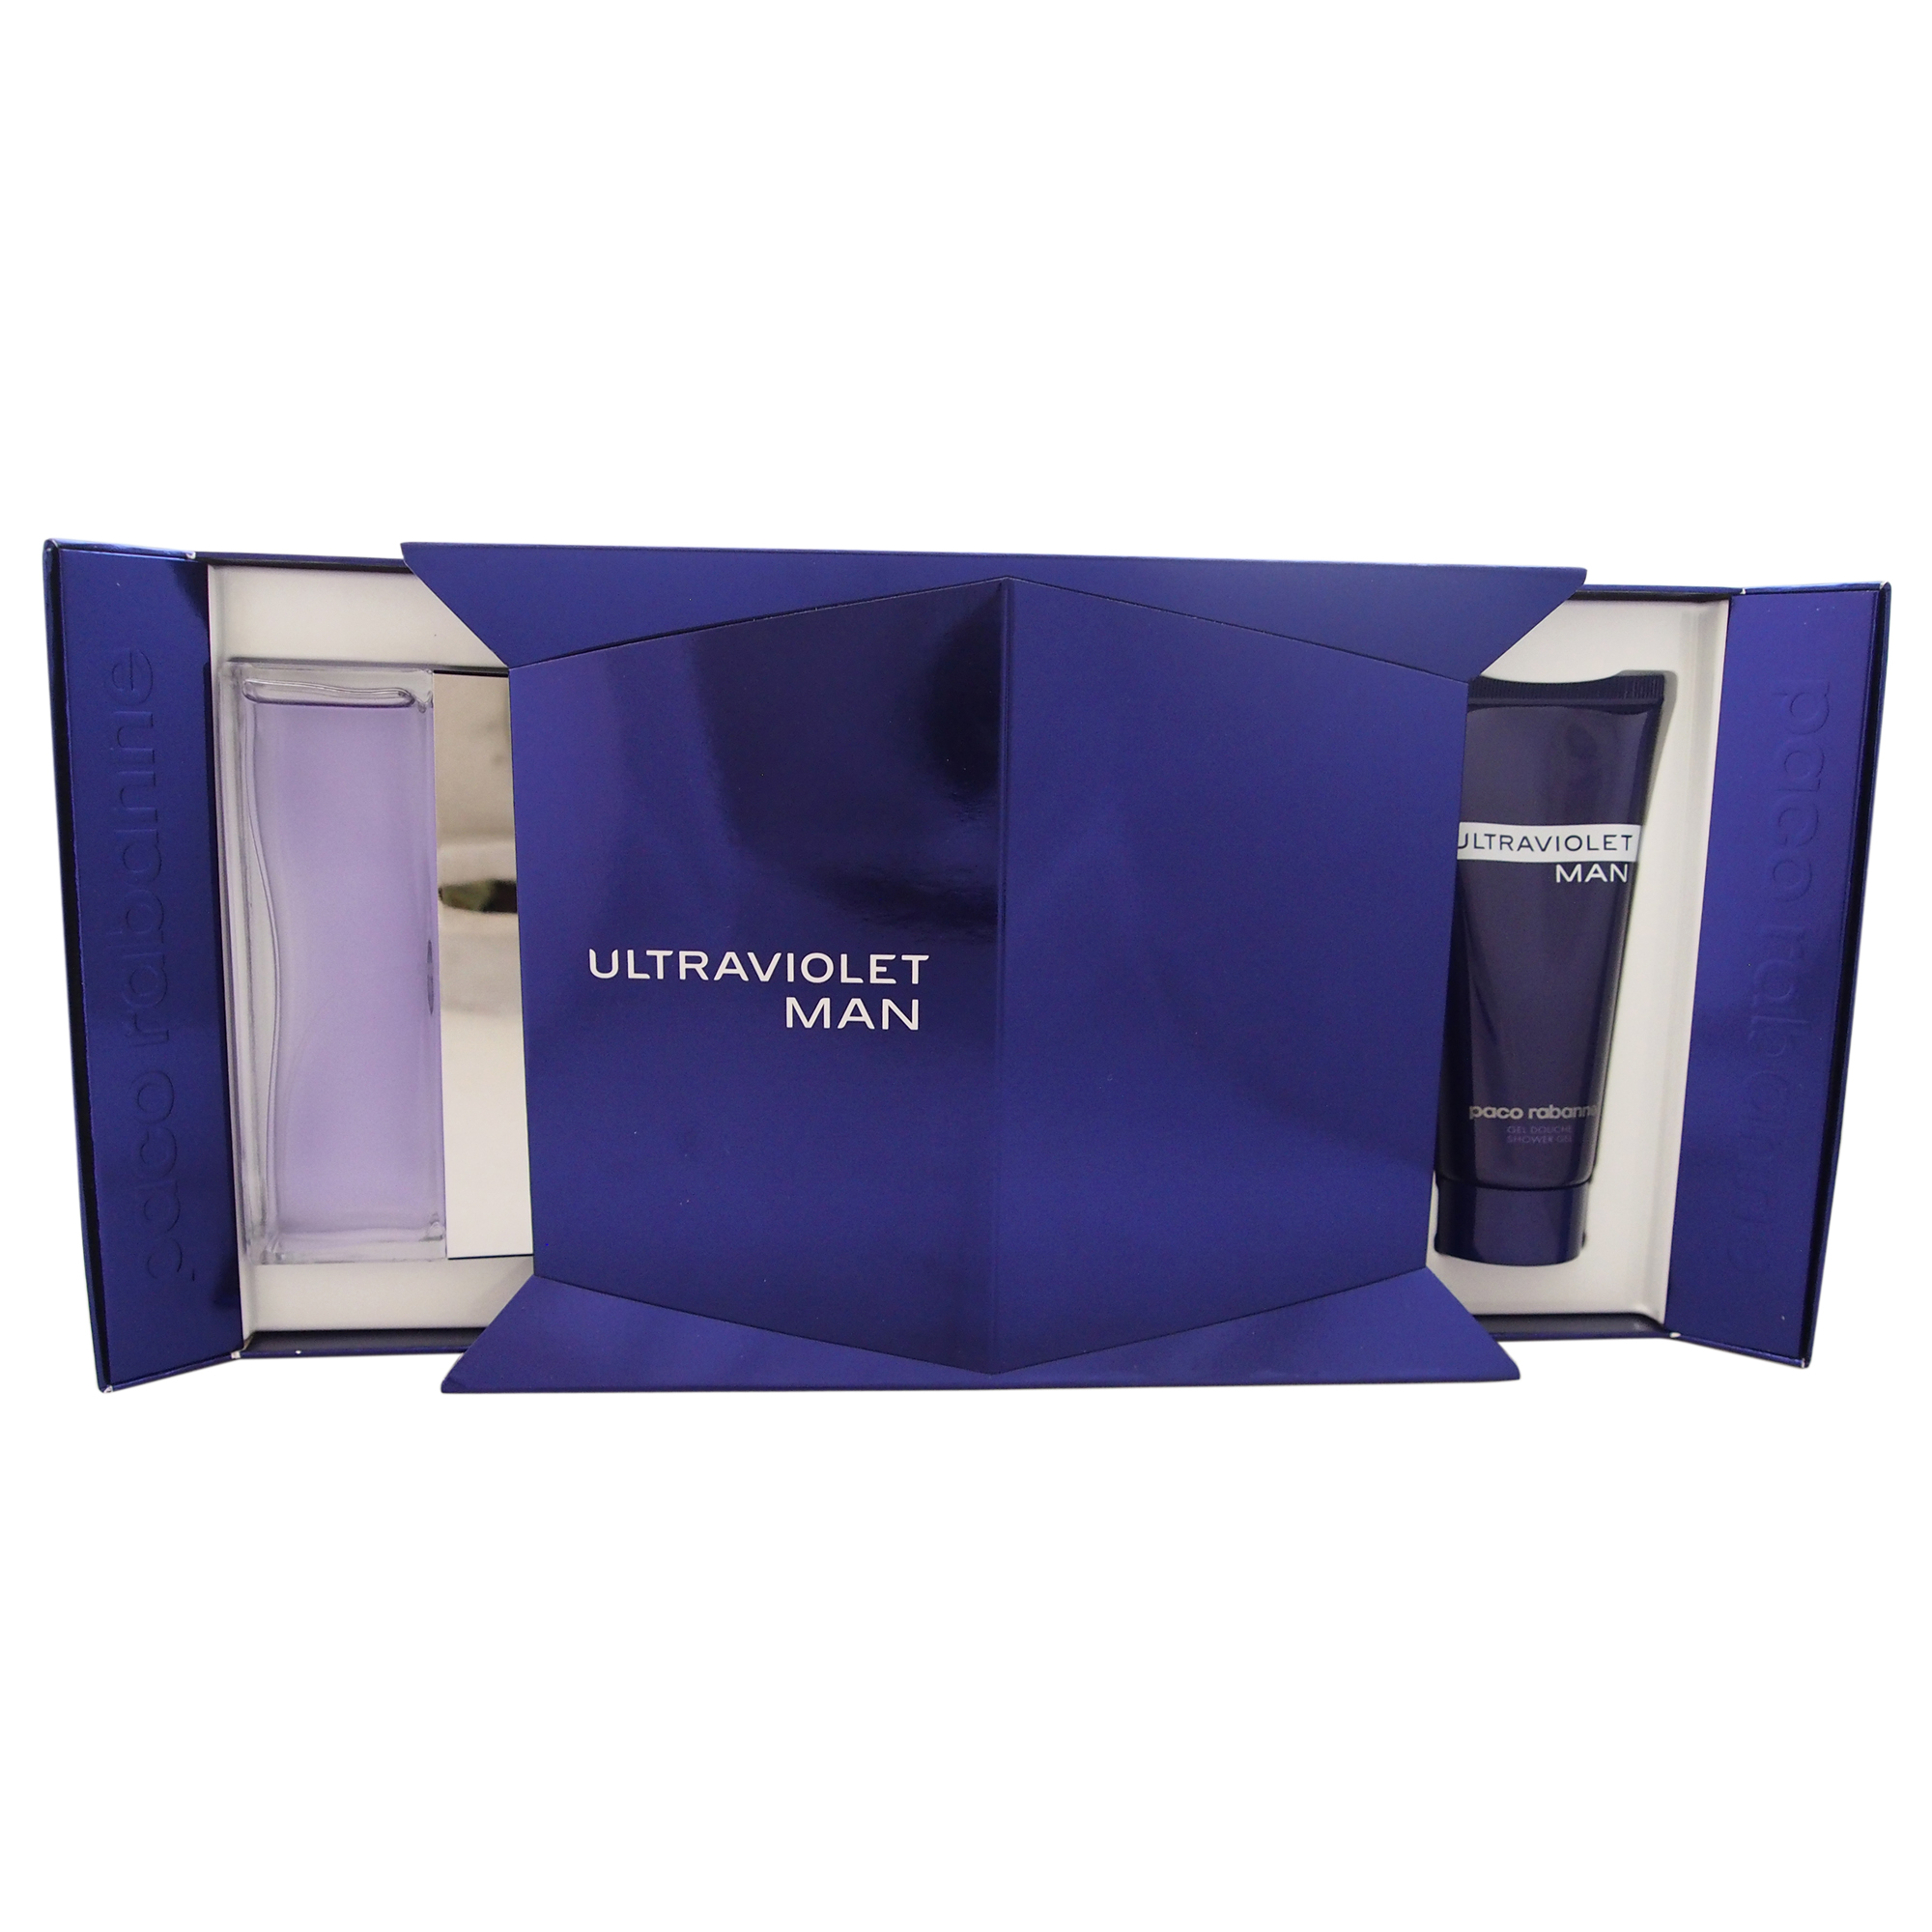 EAN 3349668520299 - Ultraviolet Man by Paco Rabanne for Men - 2 Pc Gift ...